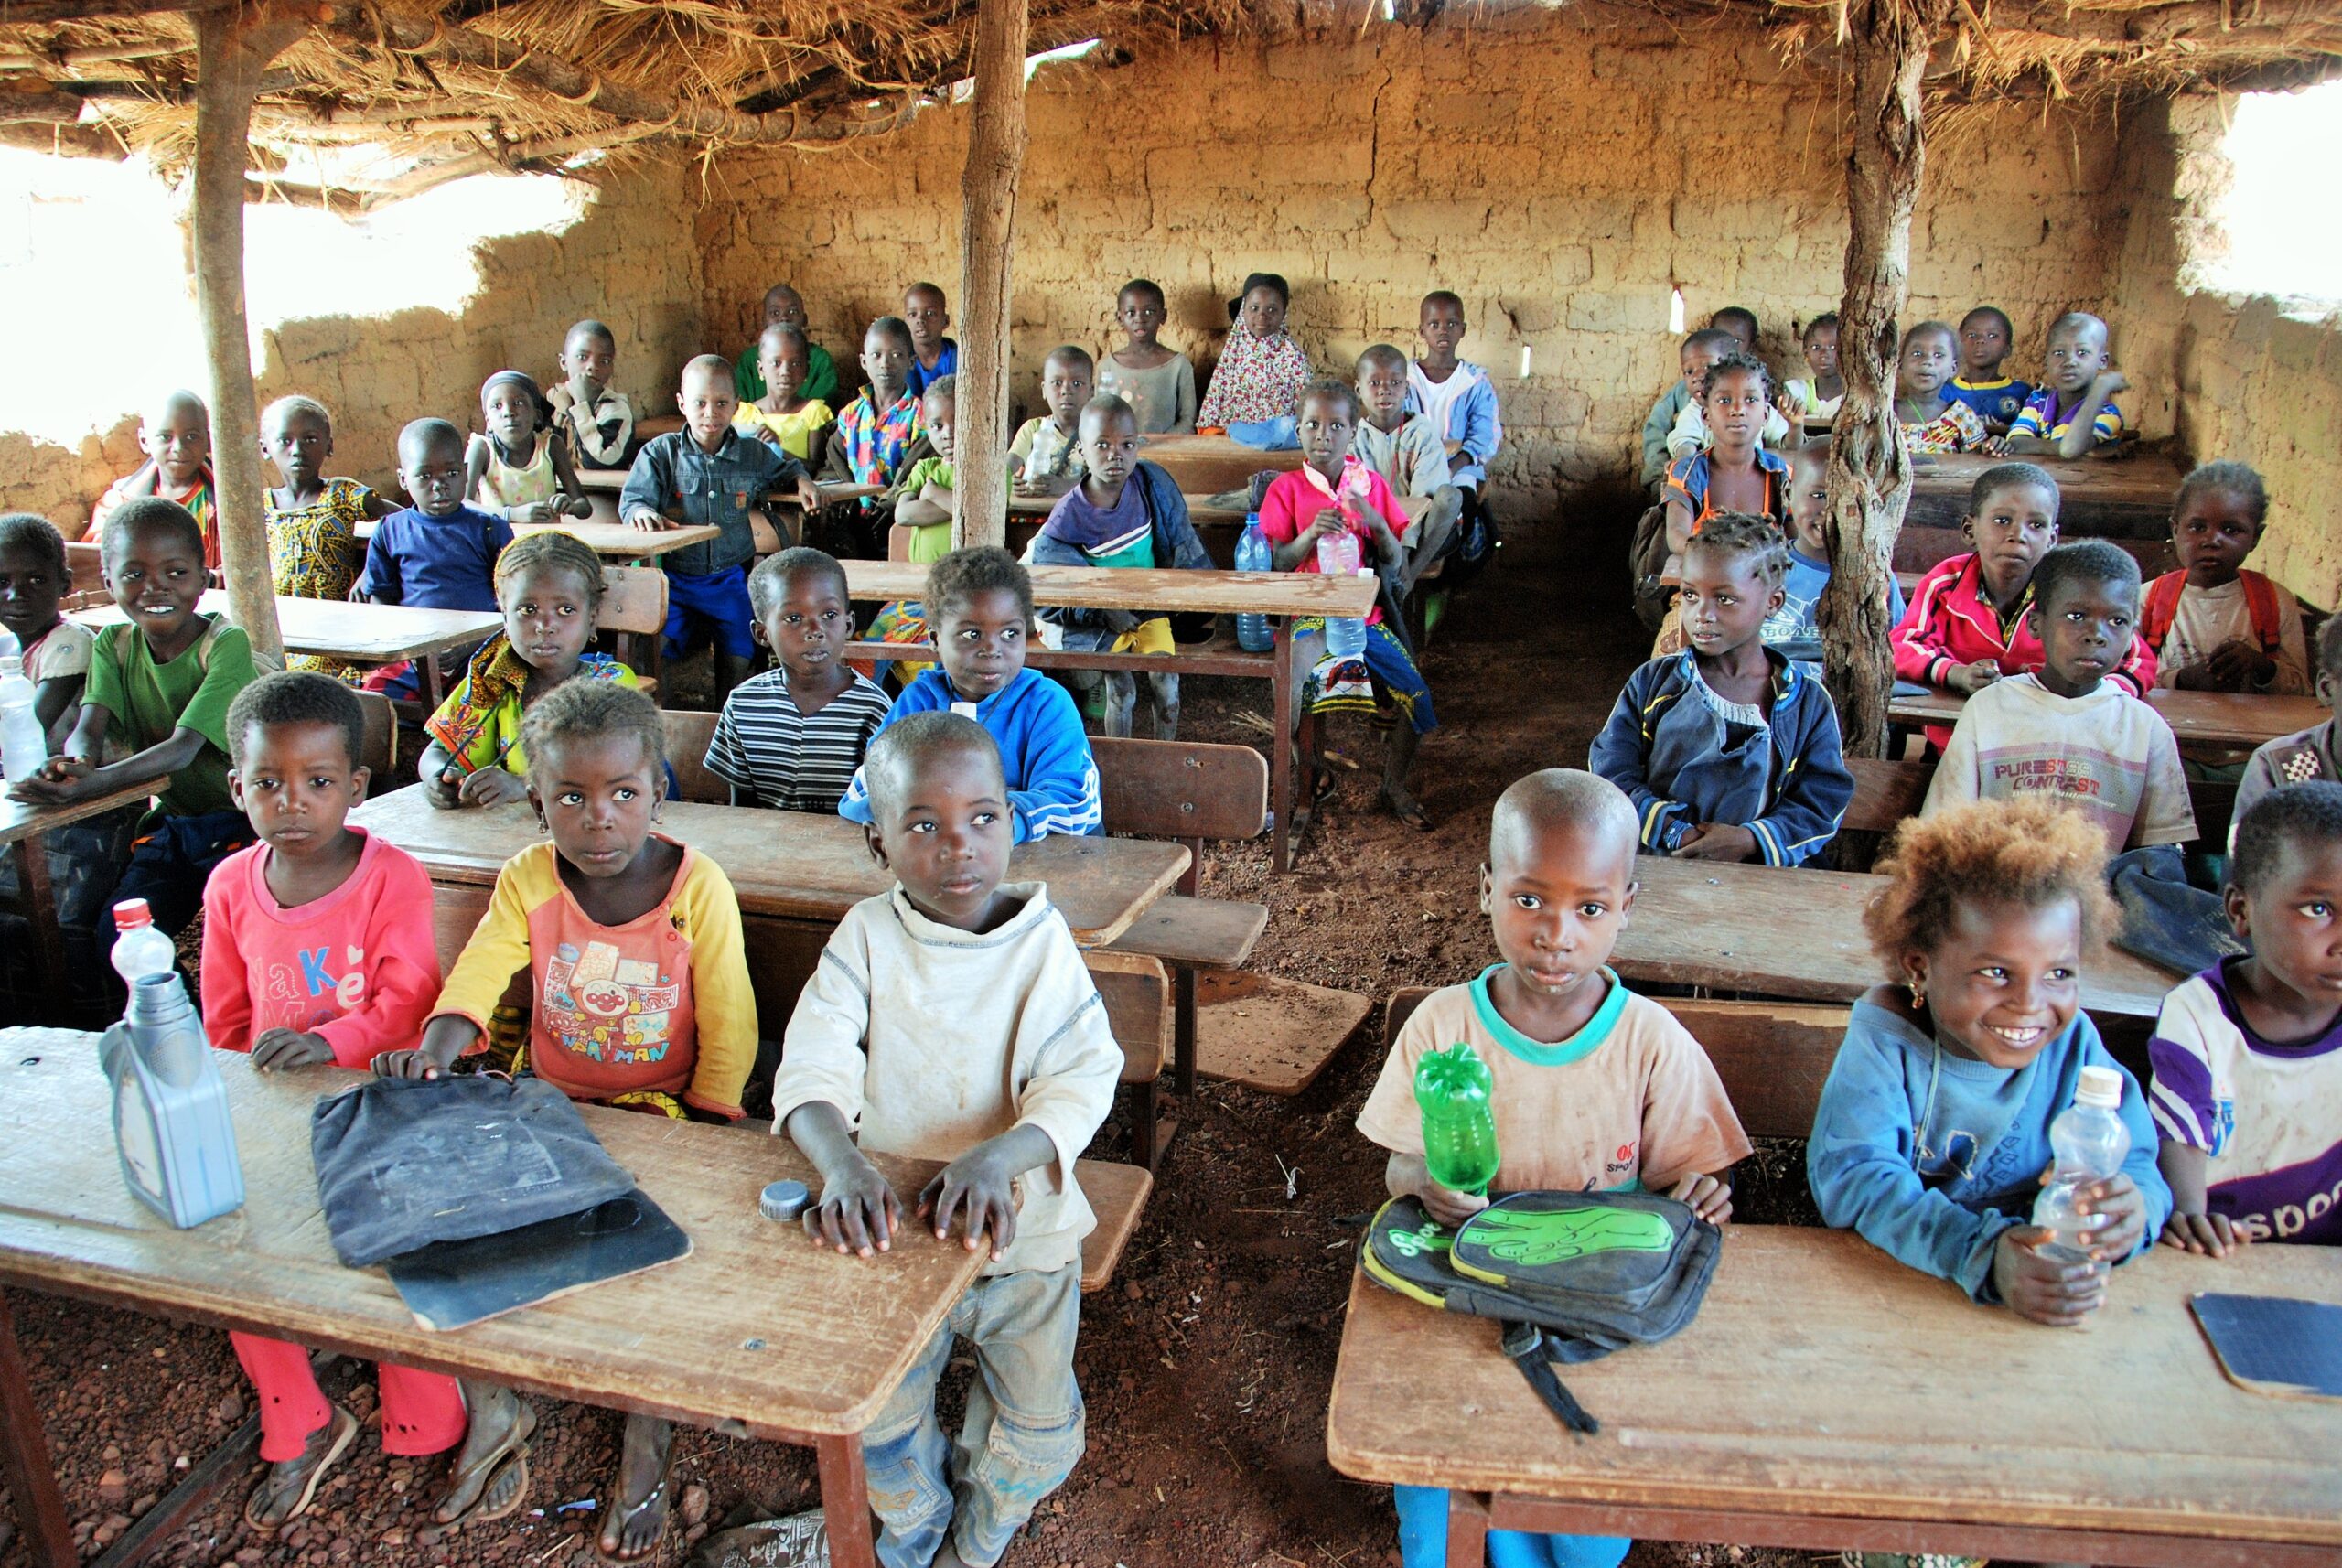 Education of children in Mali is at extreme risk of collapse